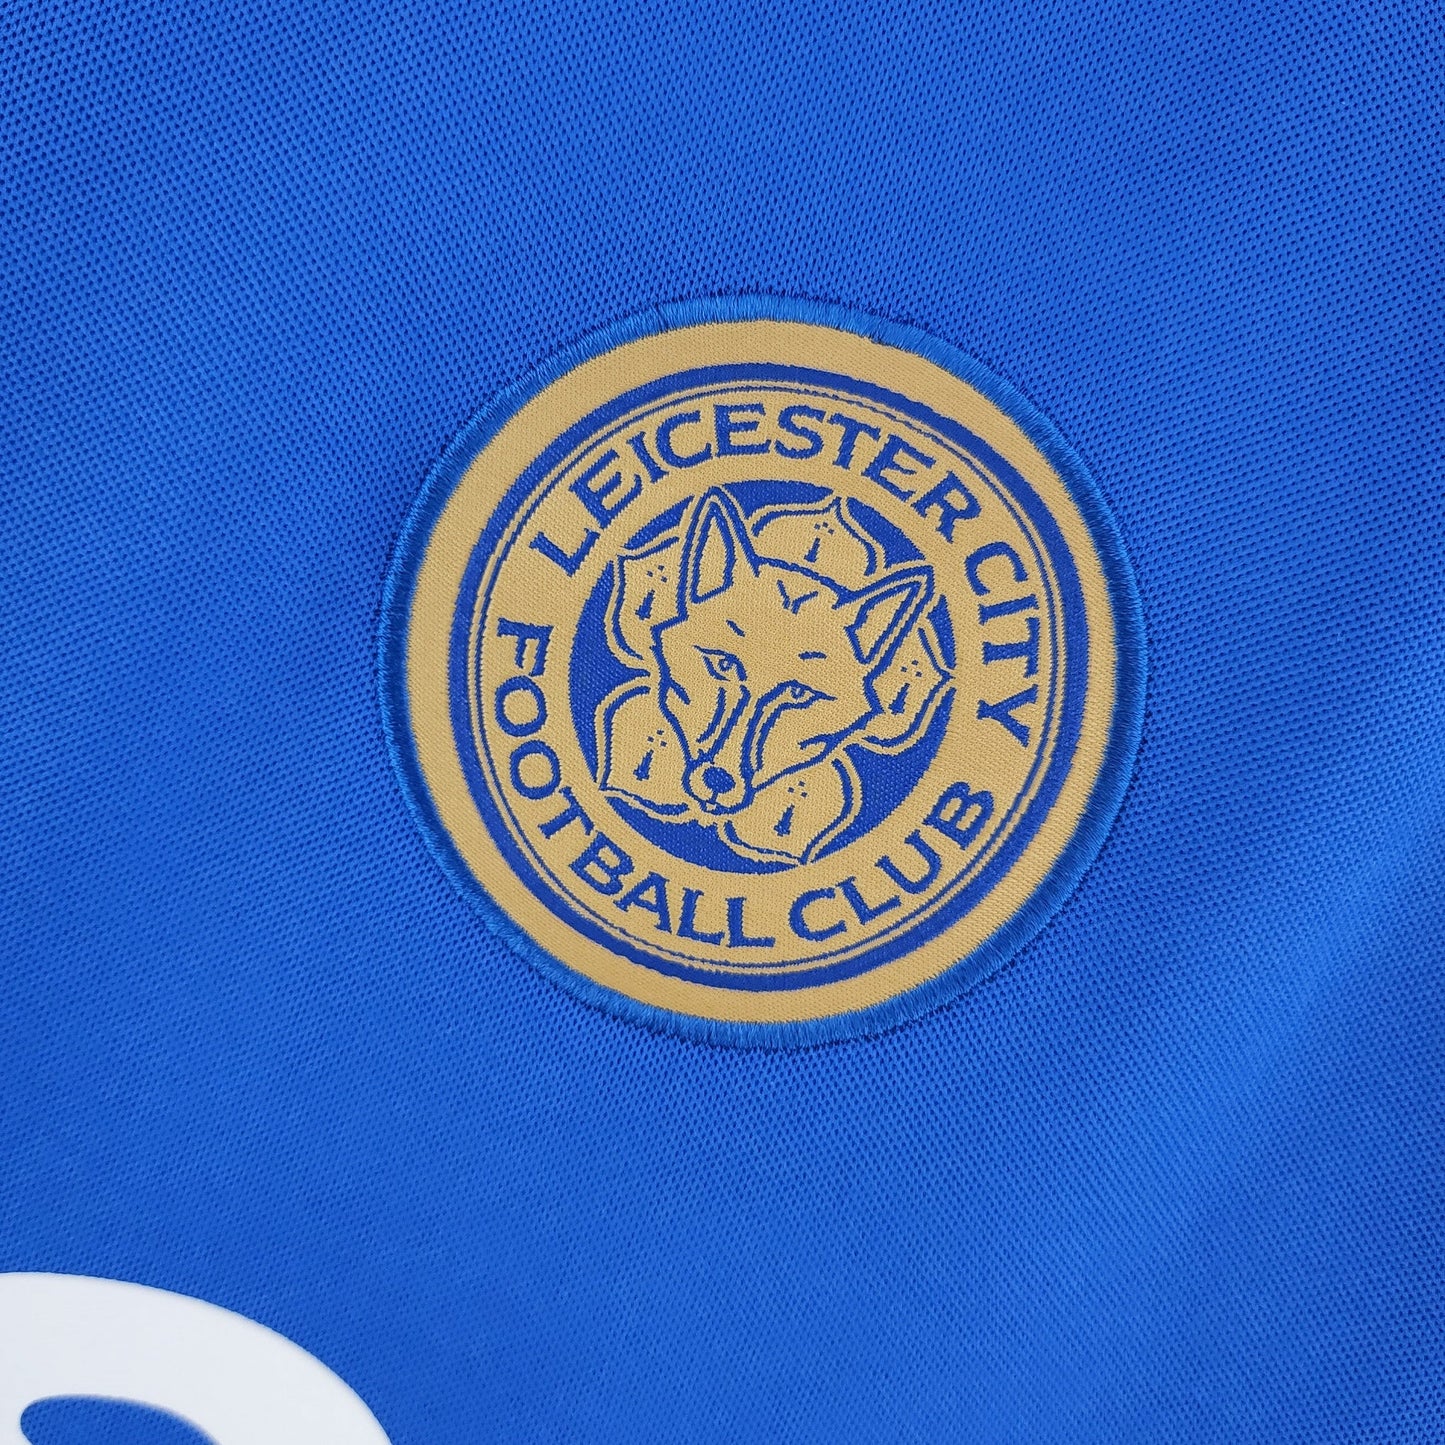 Leicester City 22/23 Home Kit